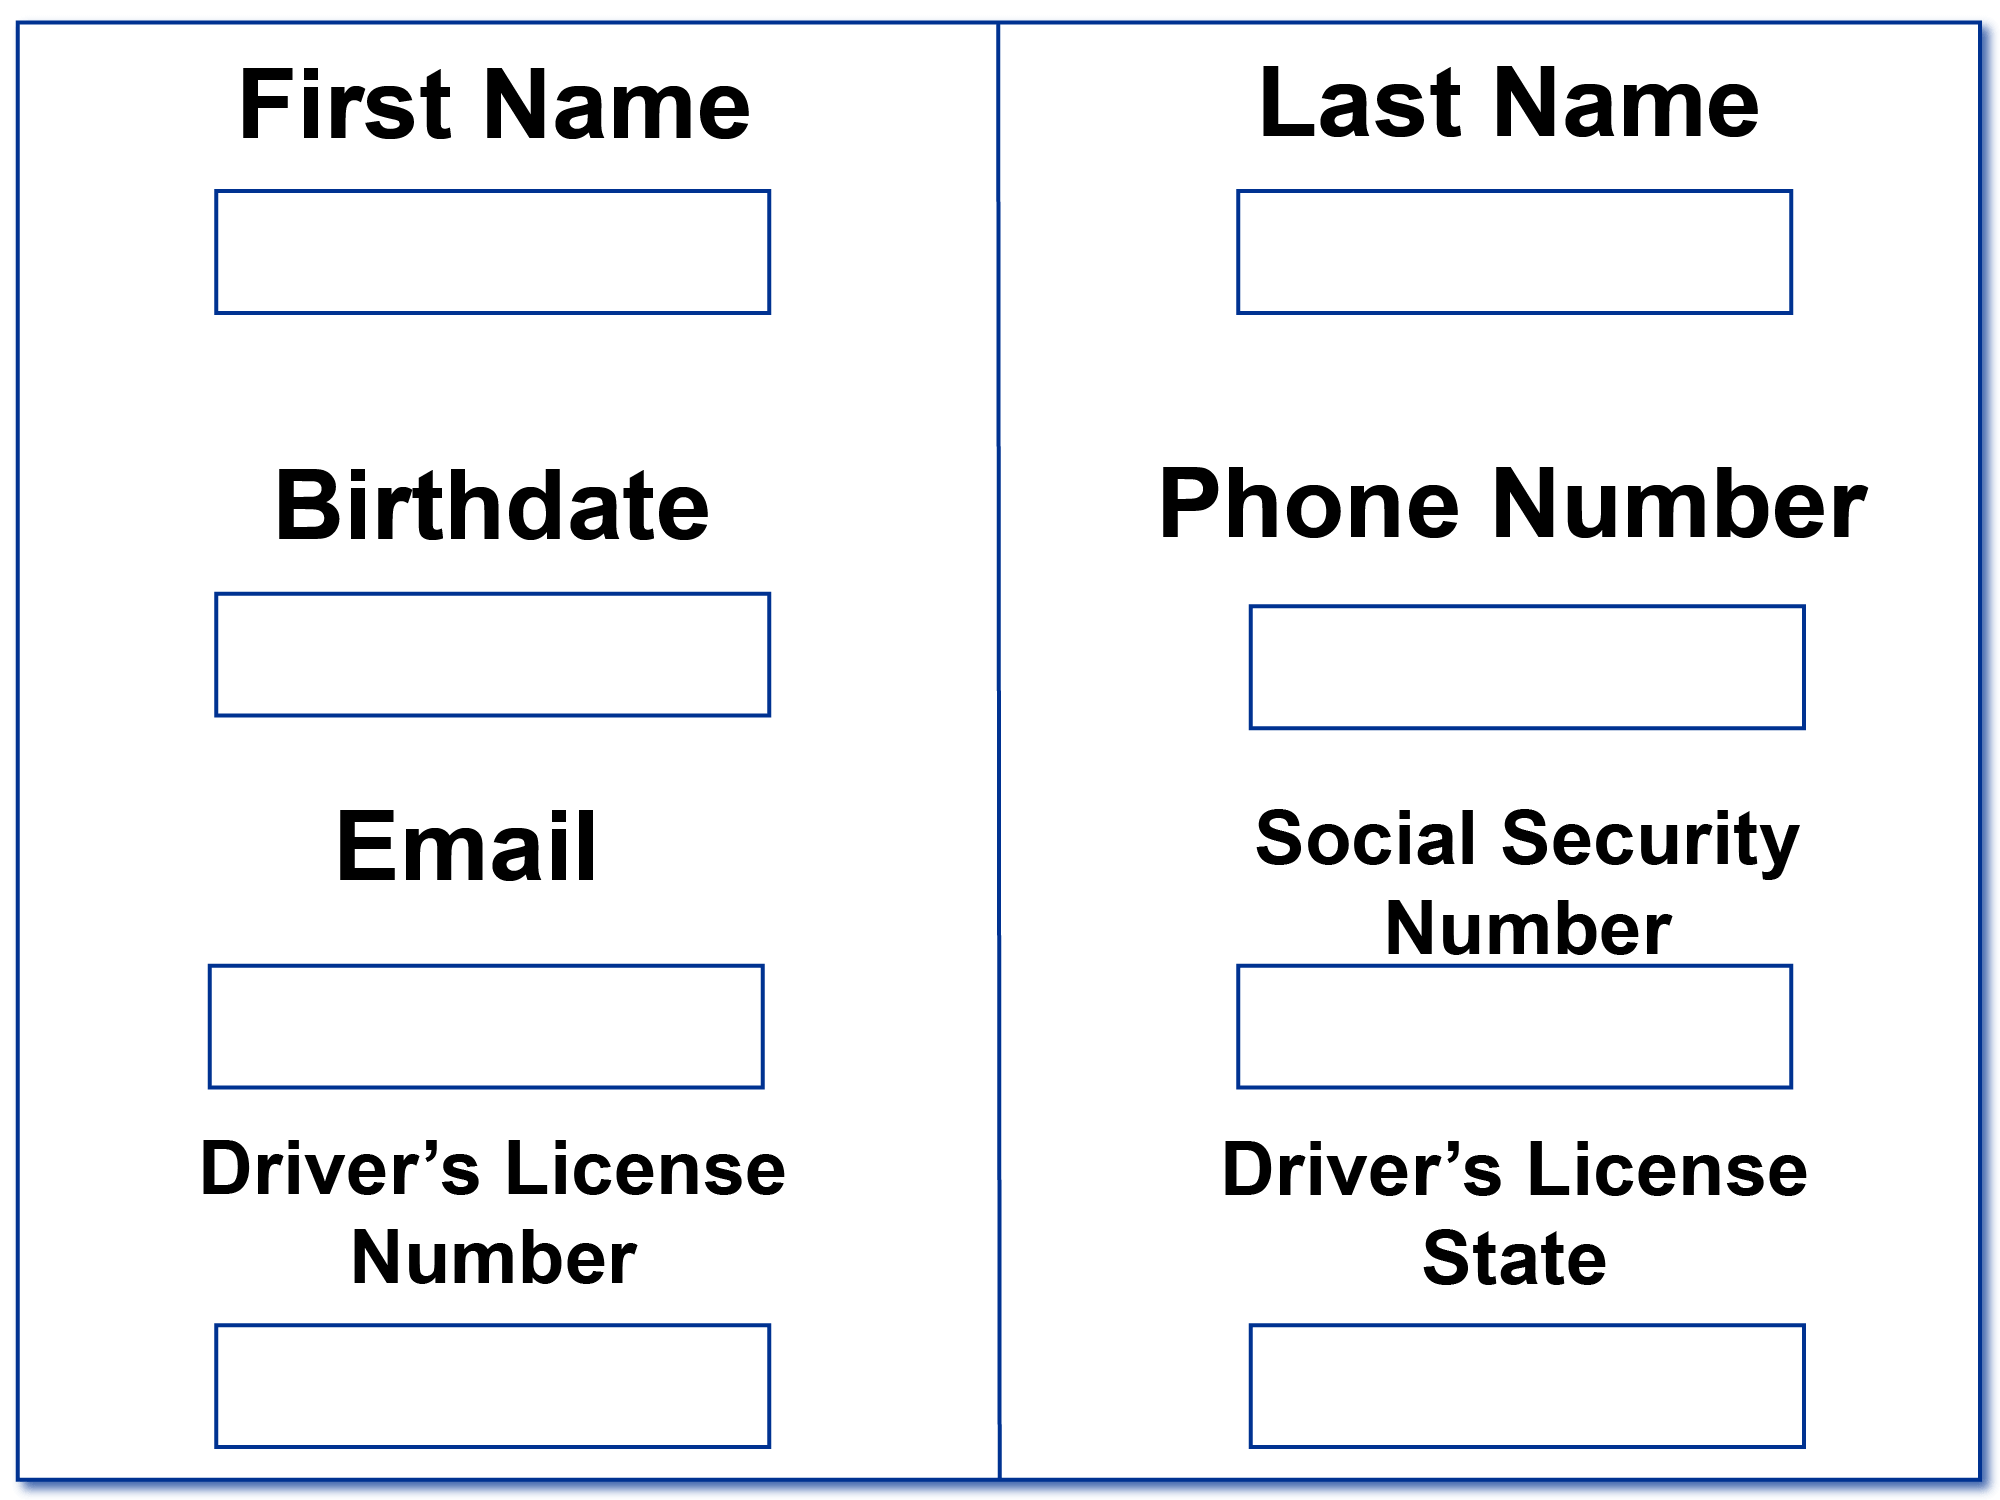 Example of a credit application.